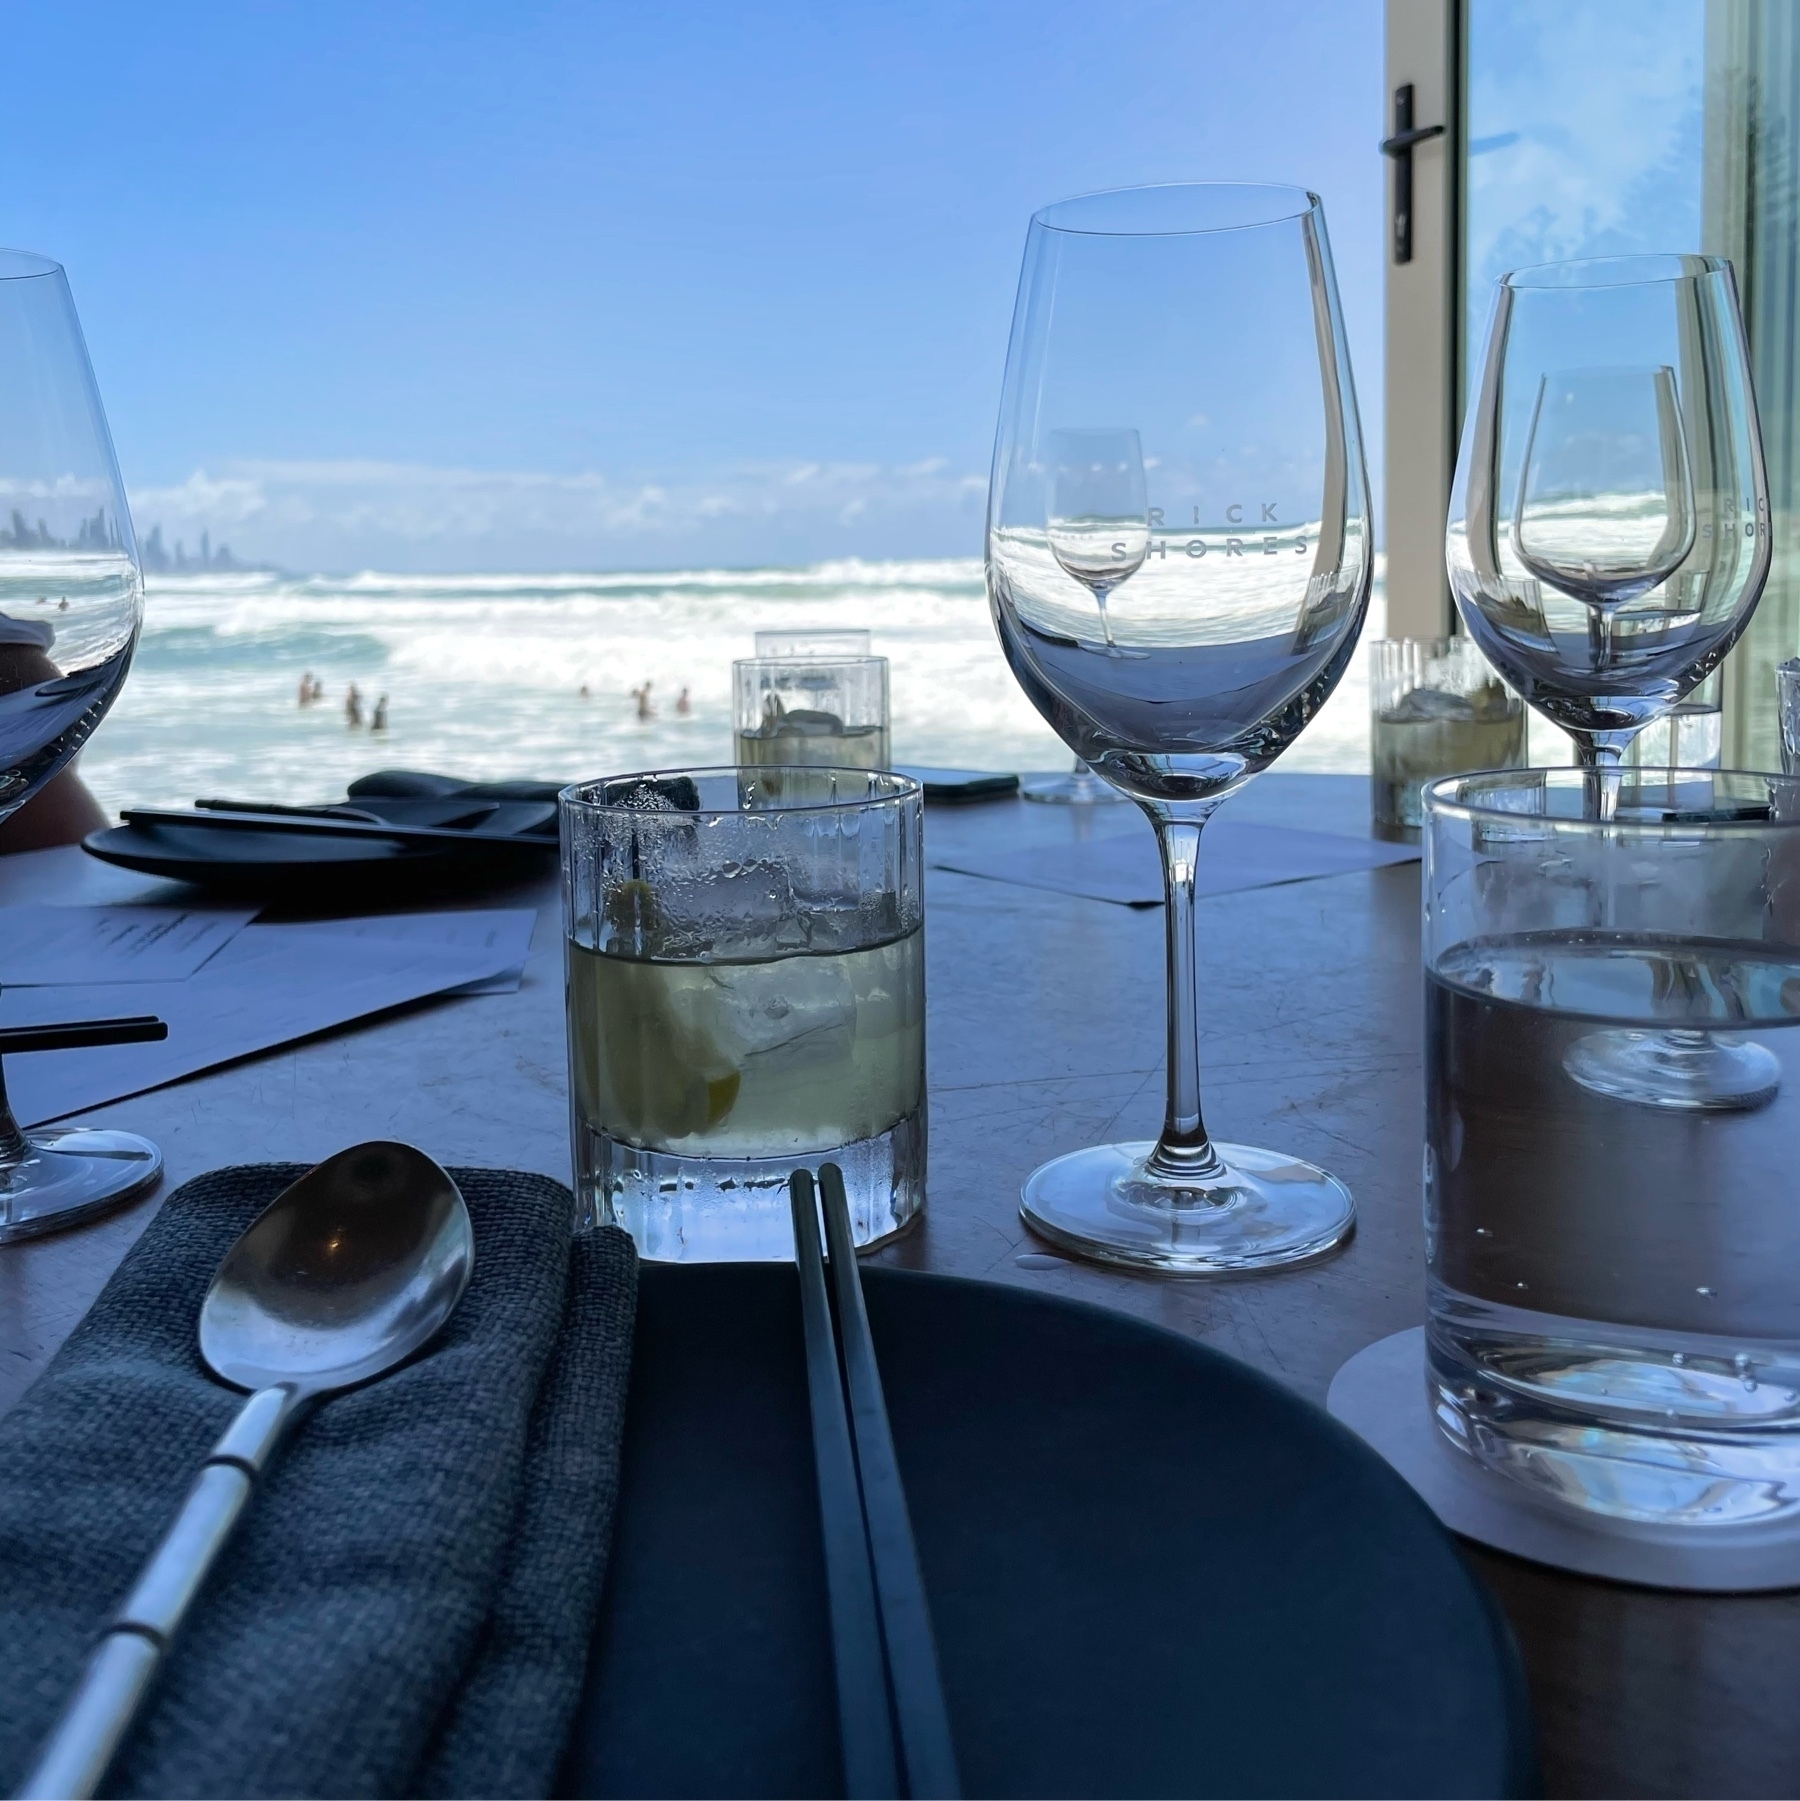 A table looking out to the beach, people in the surf further away and a clear blue sky. A black plate is in the foreground with chopsticks, large spoon and napkin on it. A tumbler with a yellow liquid is in front as are two empty wine glasses. Within the wine glasses are the smaller images of other wine glasses that are sitting behind them.